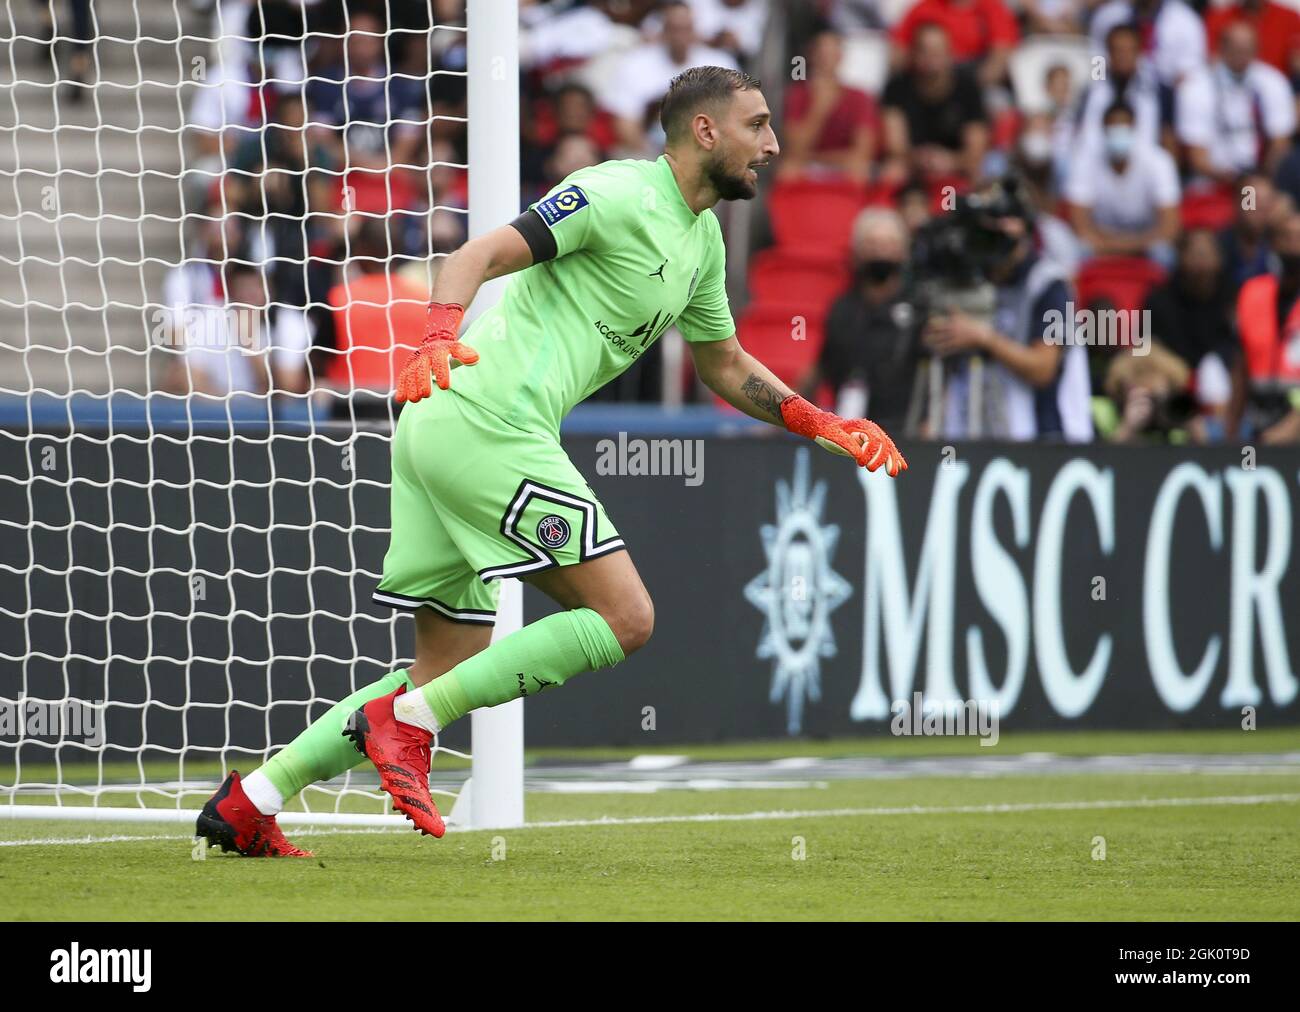 Goalkeeper of PSG Gianluigi Donnarumma during the French championship Ligue 1 football match between Paris Saint-Germain (PSG) and Clermont Foot 63 on September 11, 2021 at Parc des Princes stadium in Paris, France Stock Photo